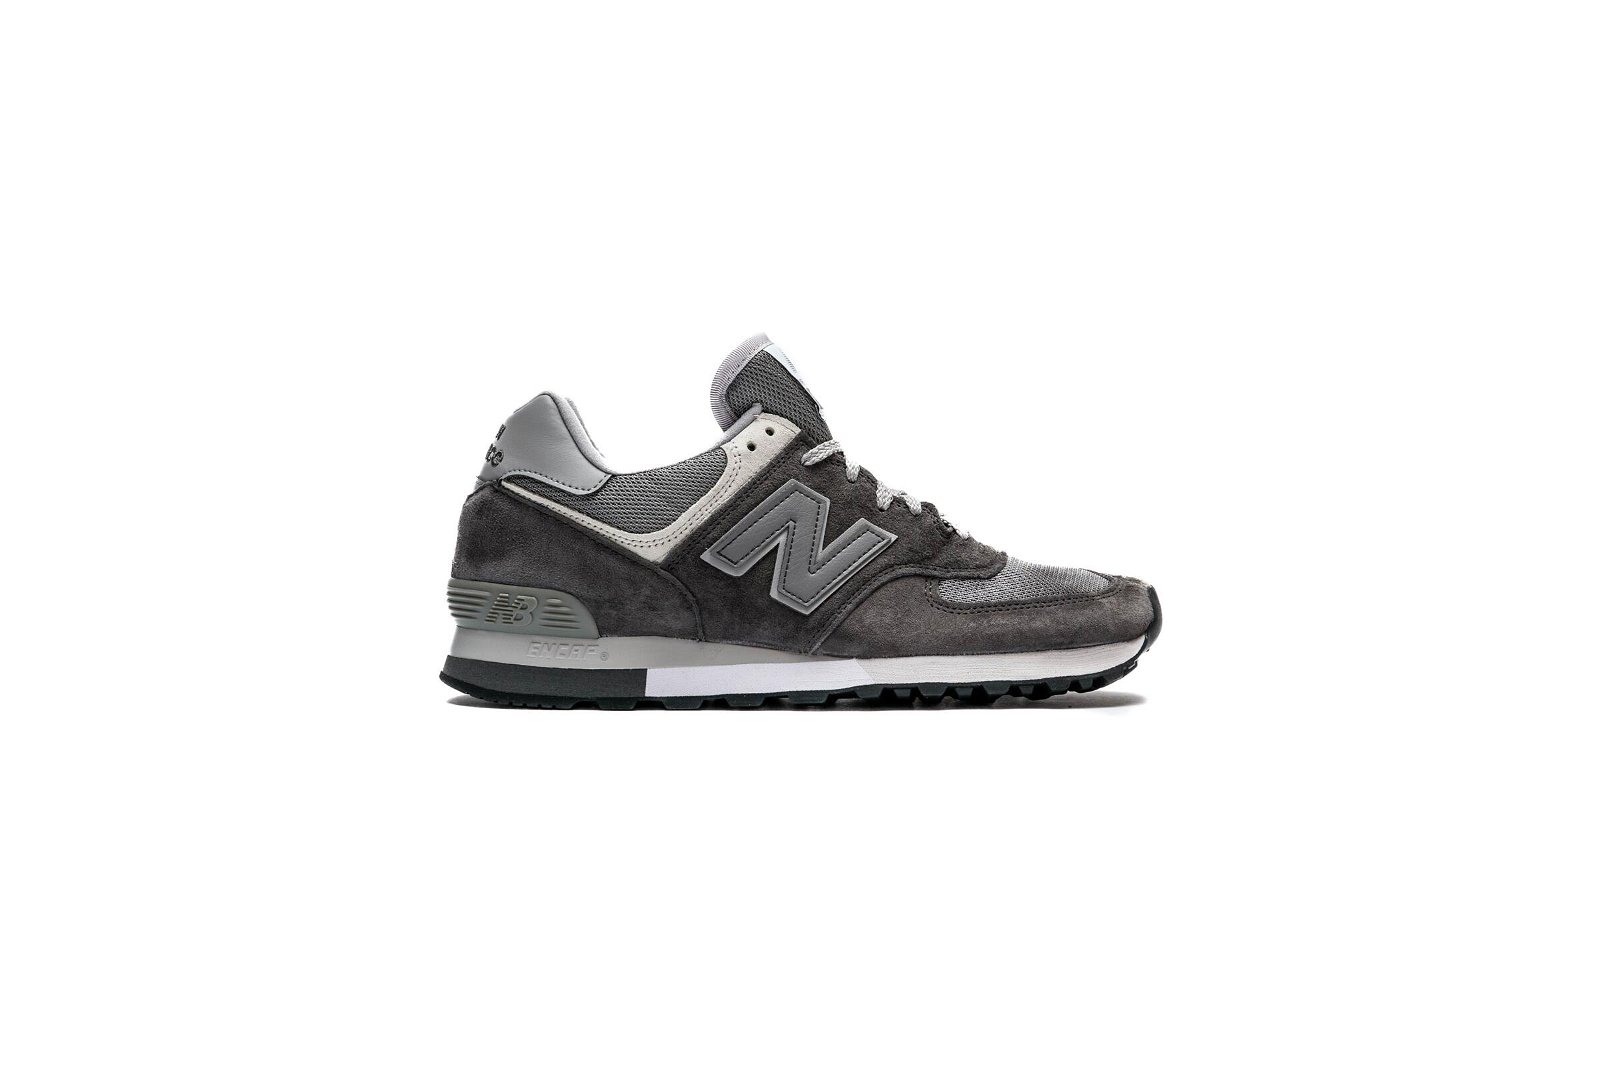 New Balance OU576PNV "Made in England"